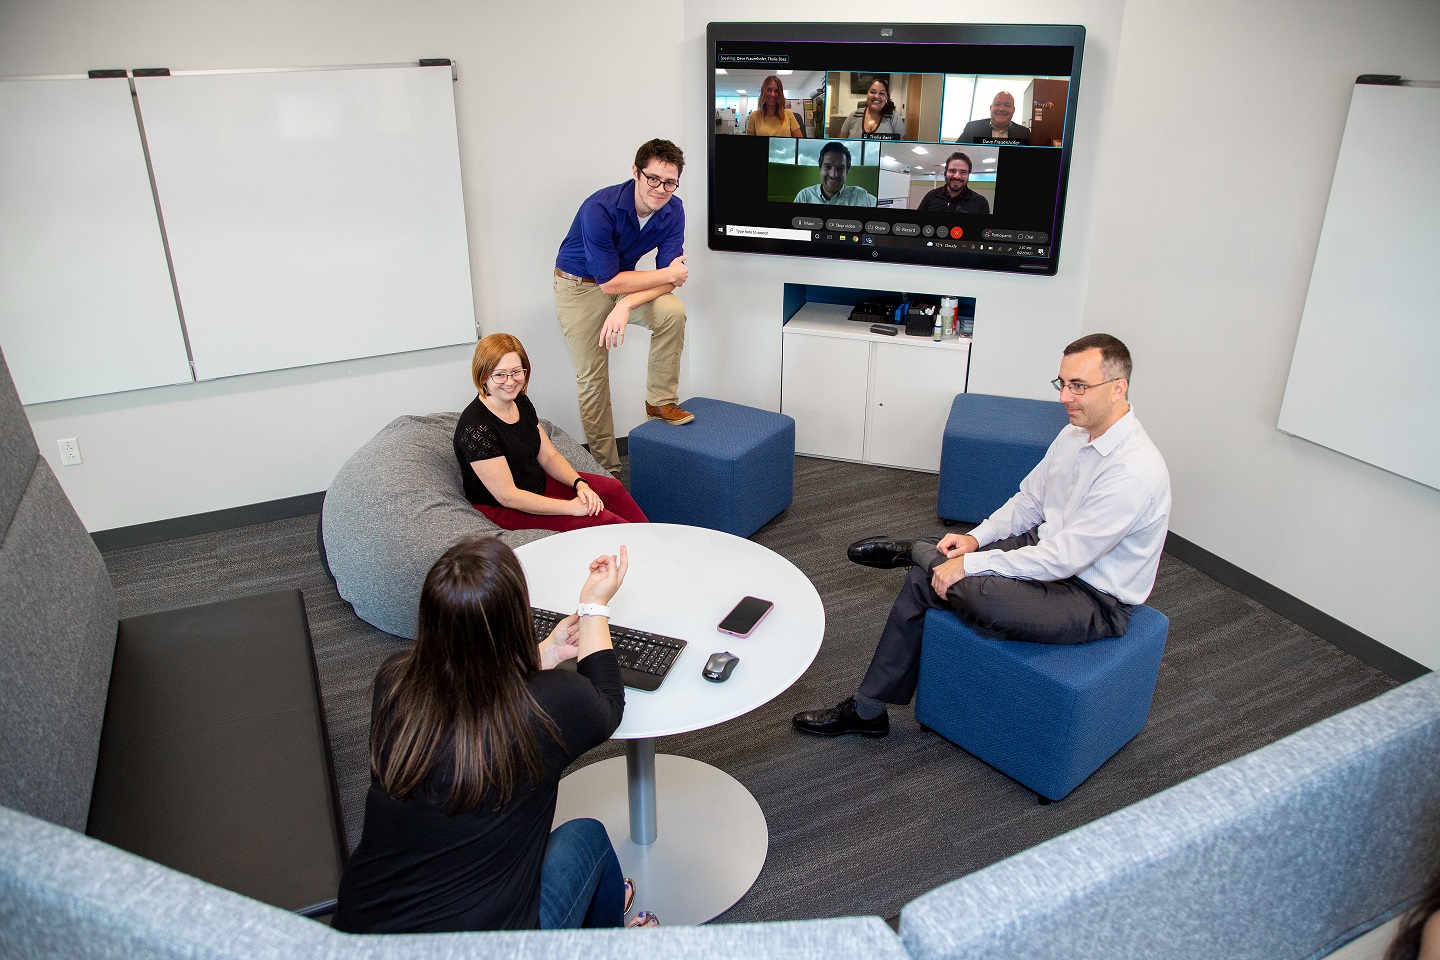 State-of-the art technology & collaboration spaces create a fun and engaging workplace